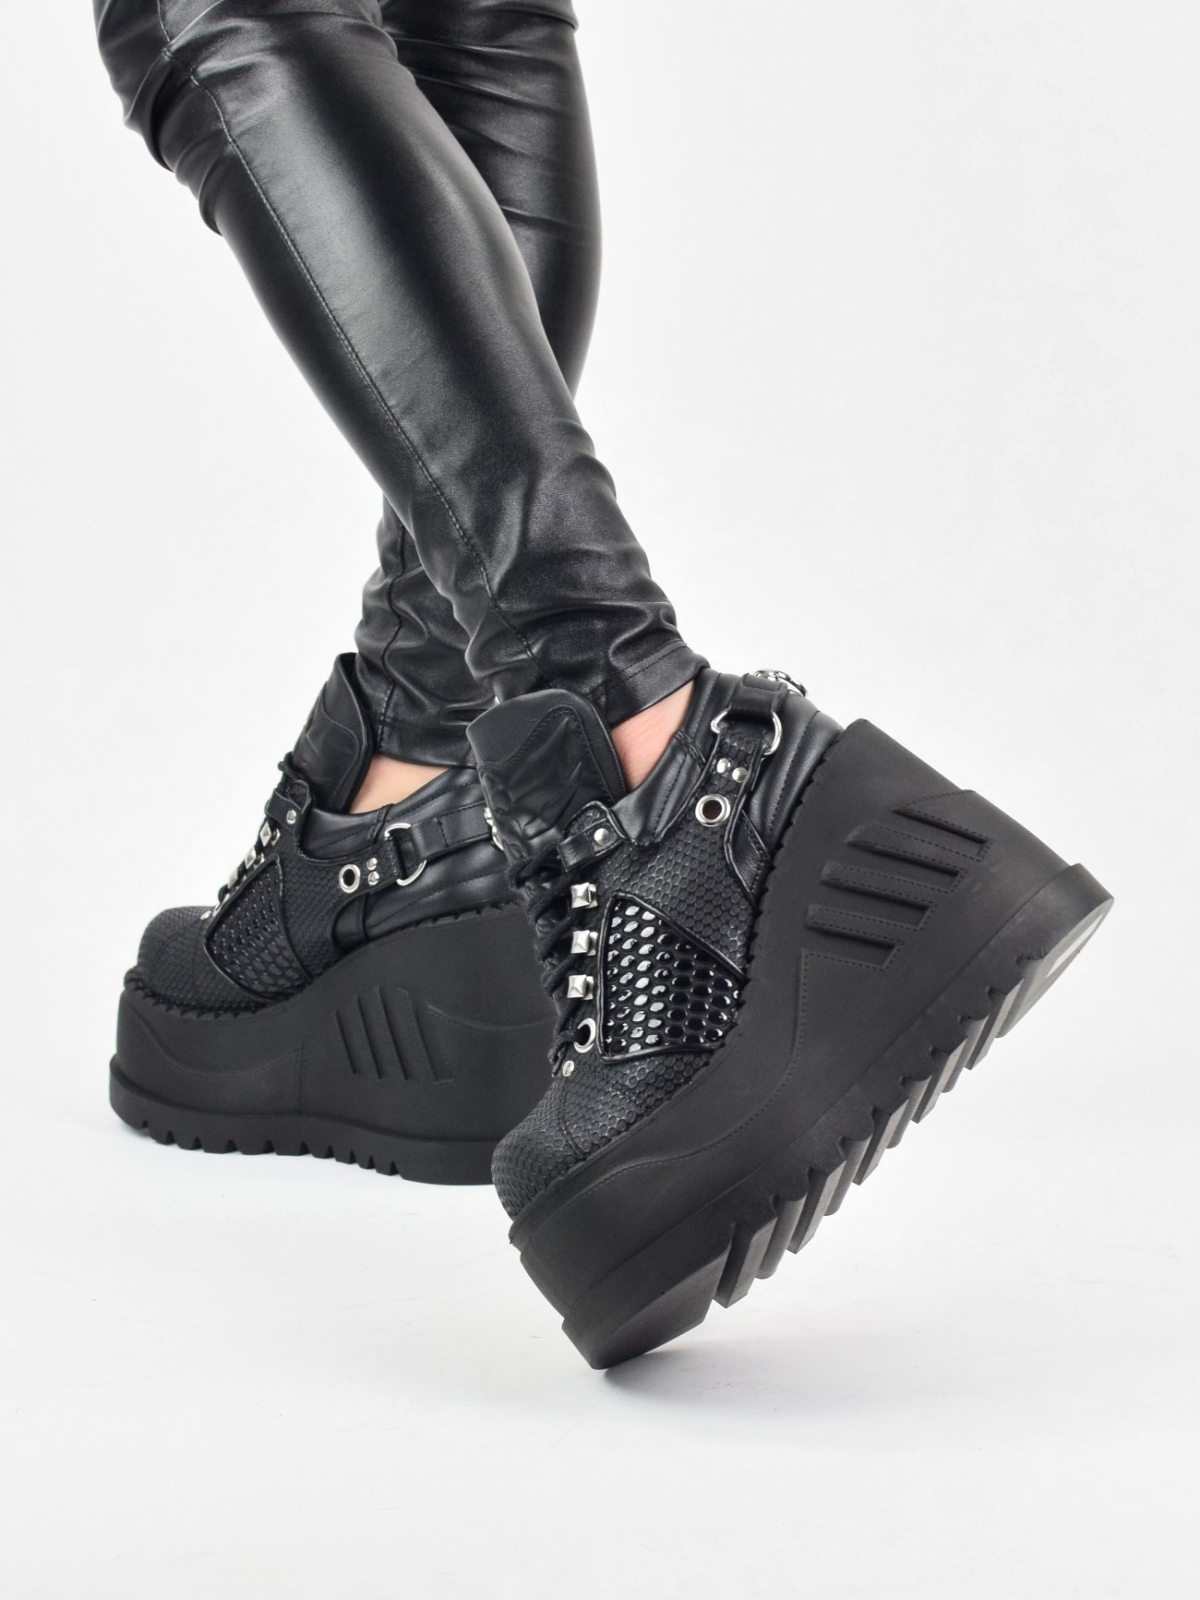 Stomp 09 alternative design high platform ankle boots with stripped details in black